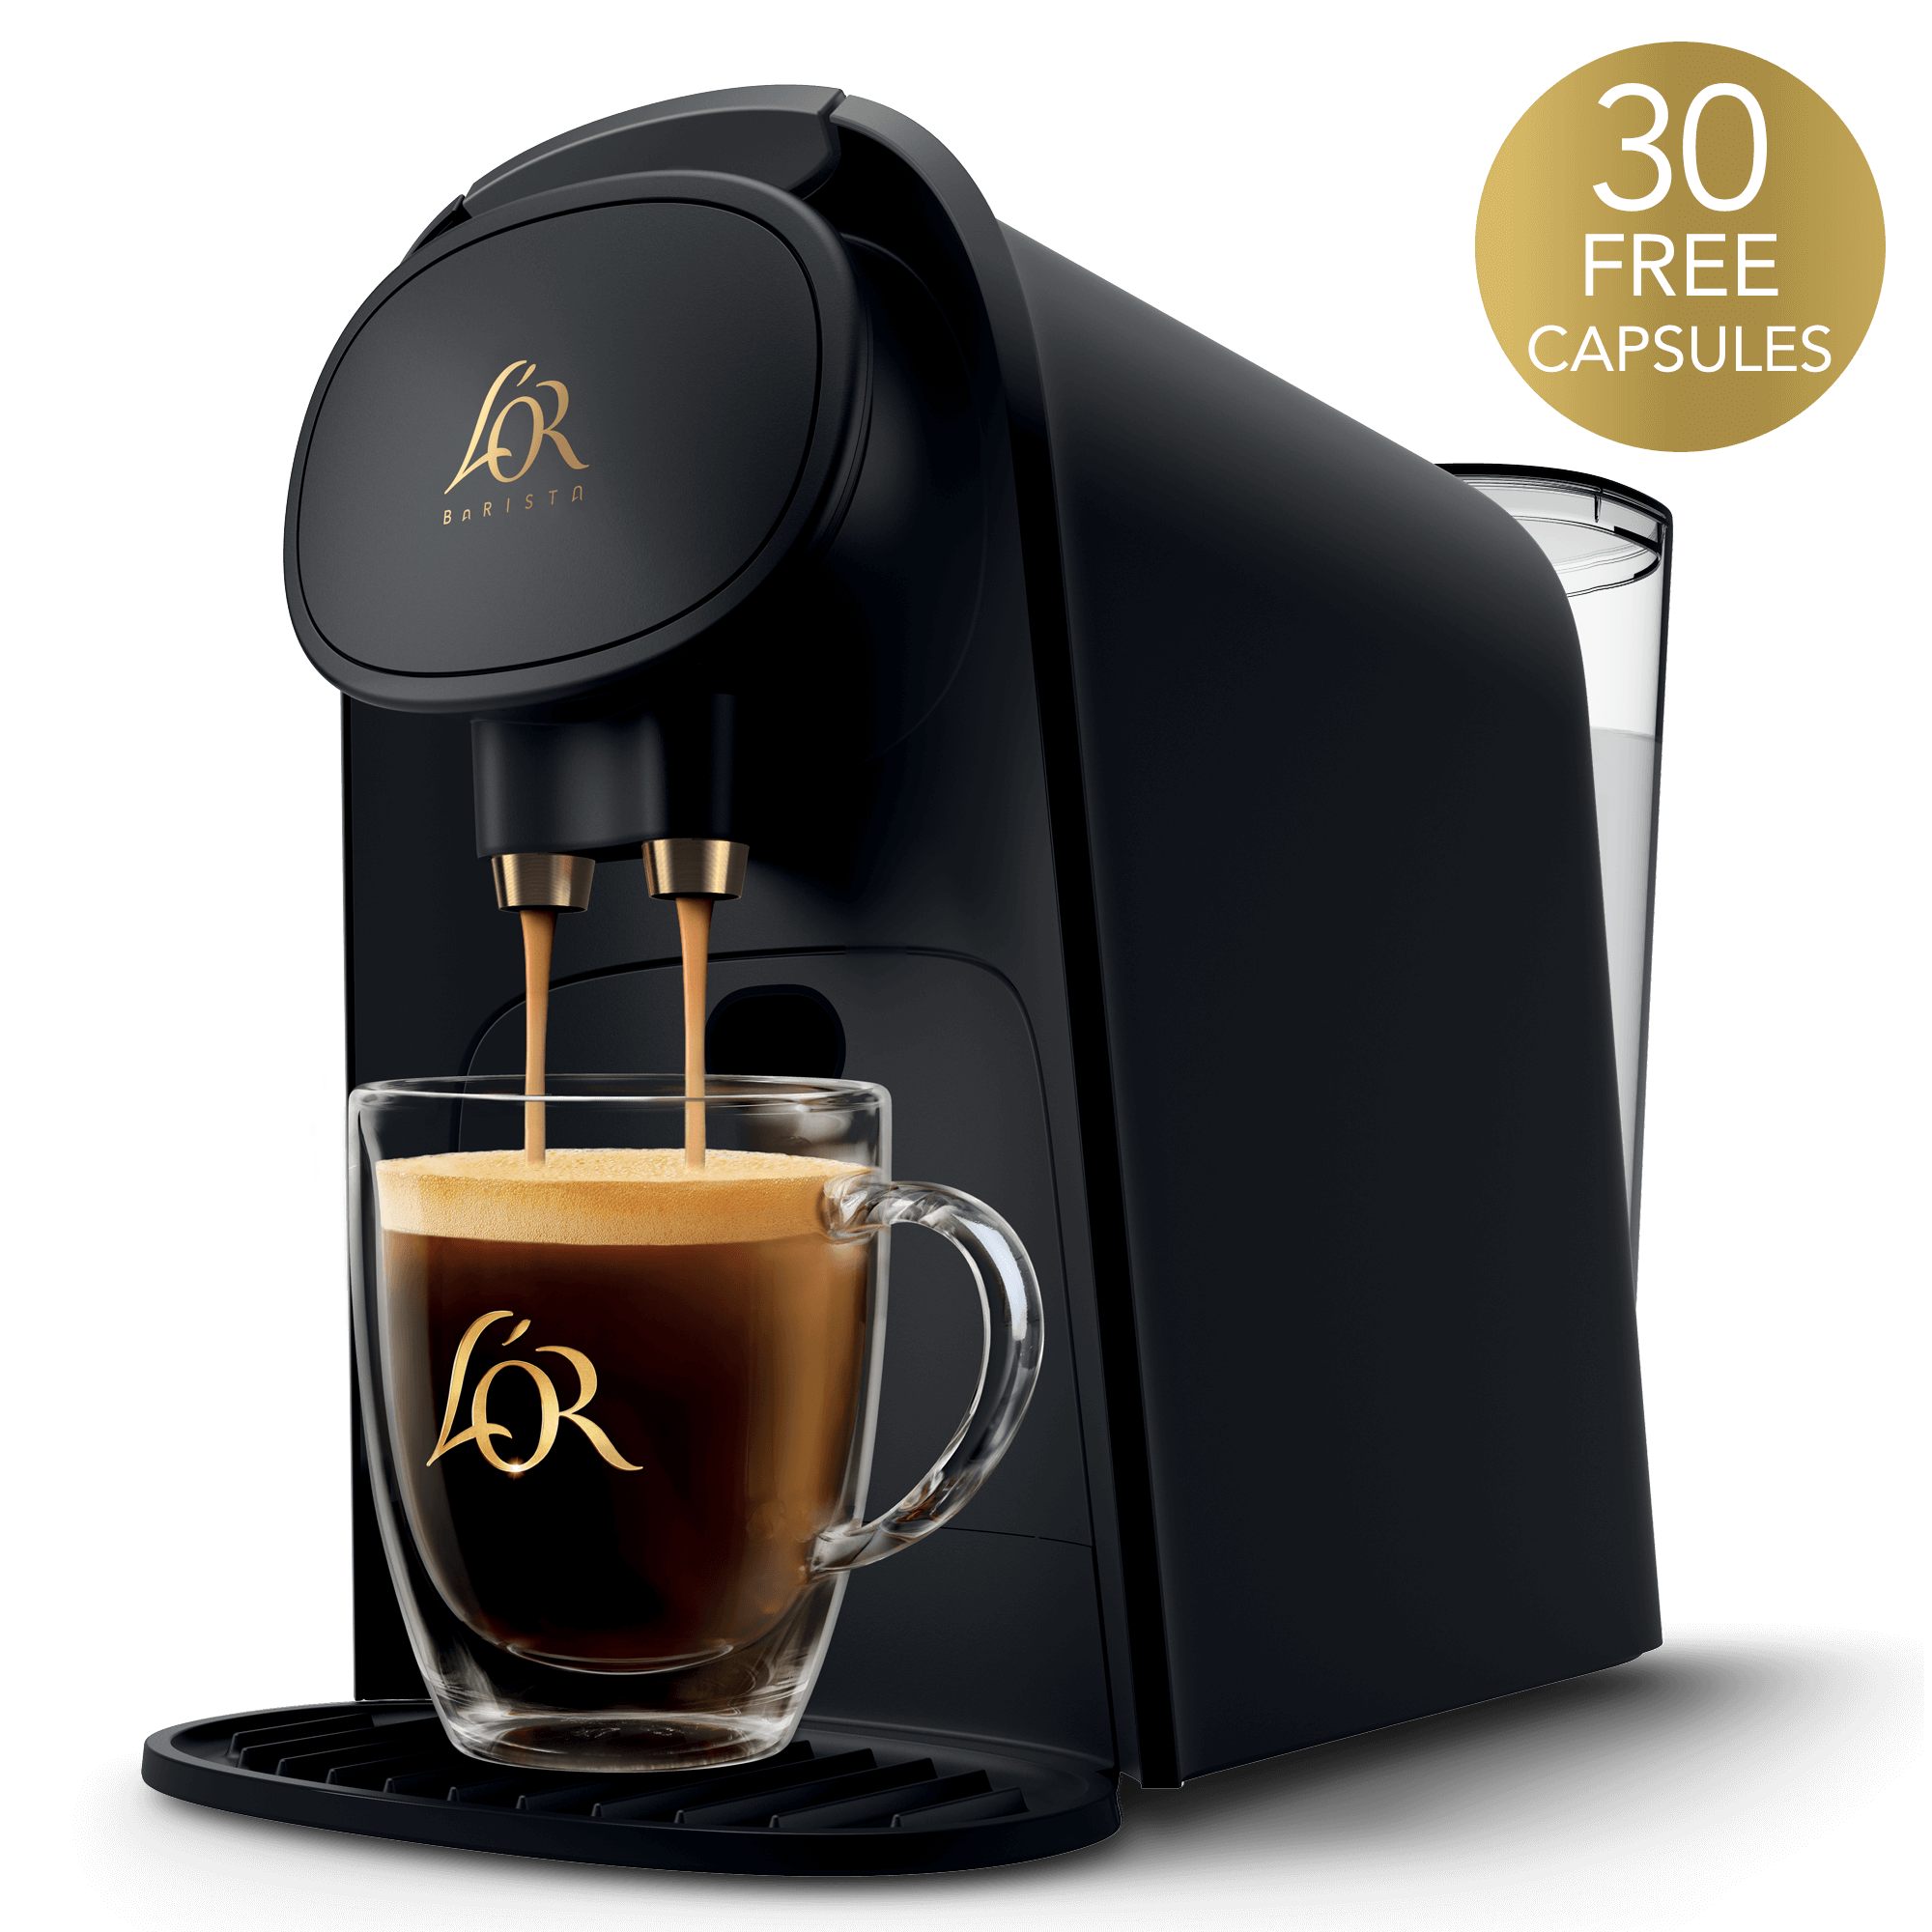 Image of L'OR BARISTA System in black. 